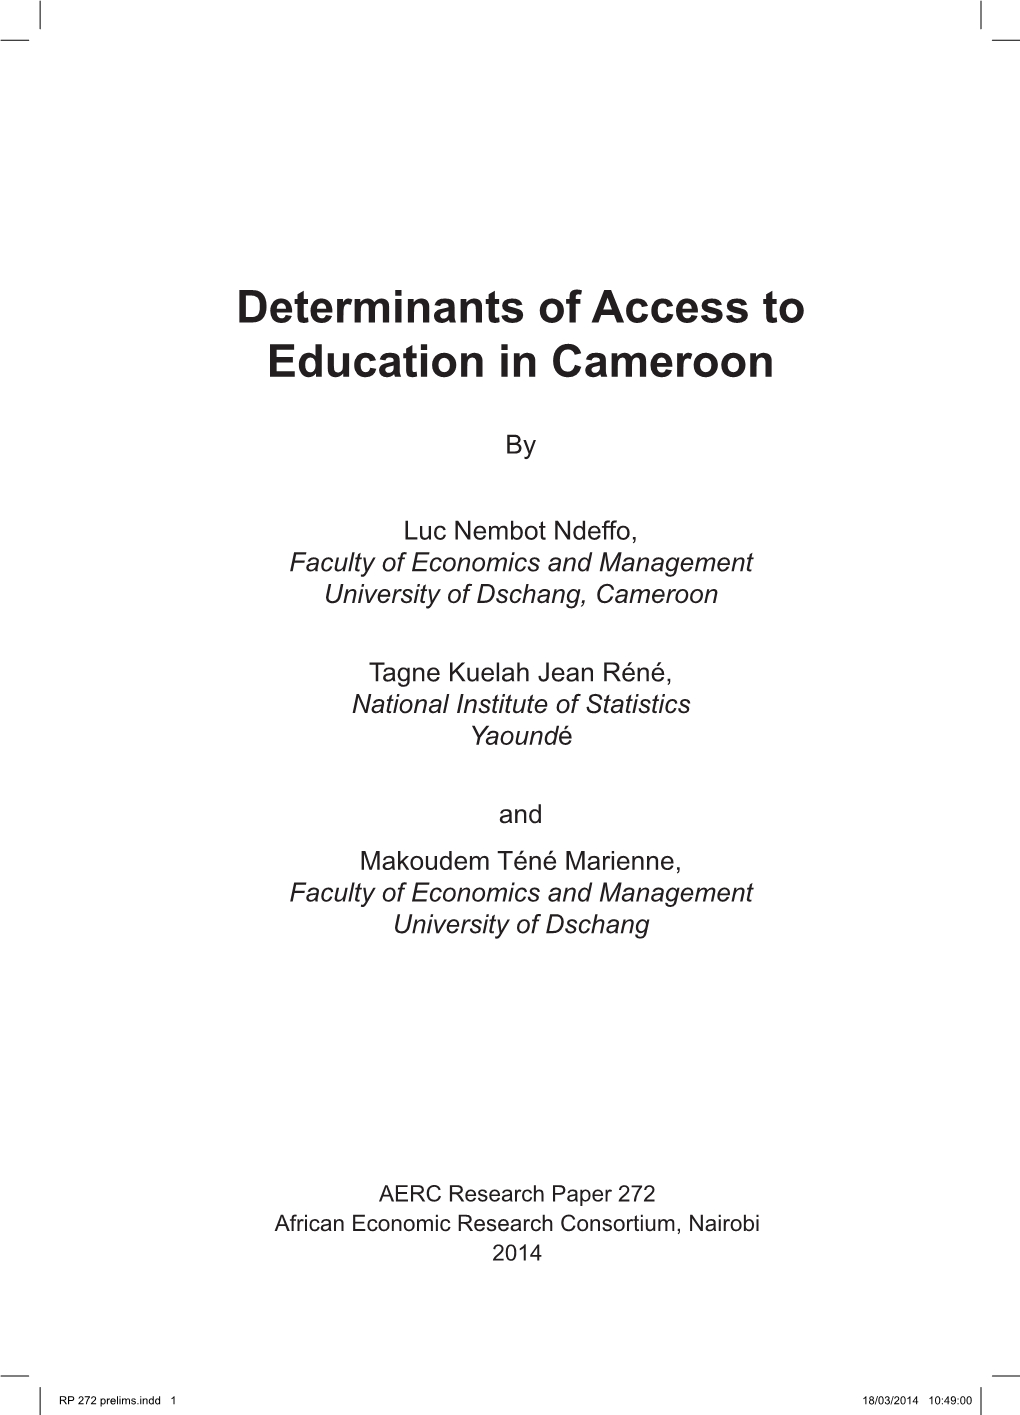 Determinants of Access to Education in Cameroon